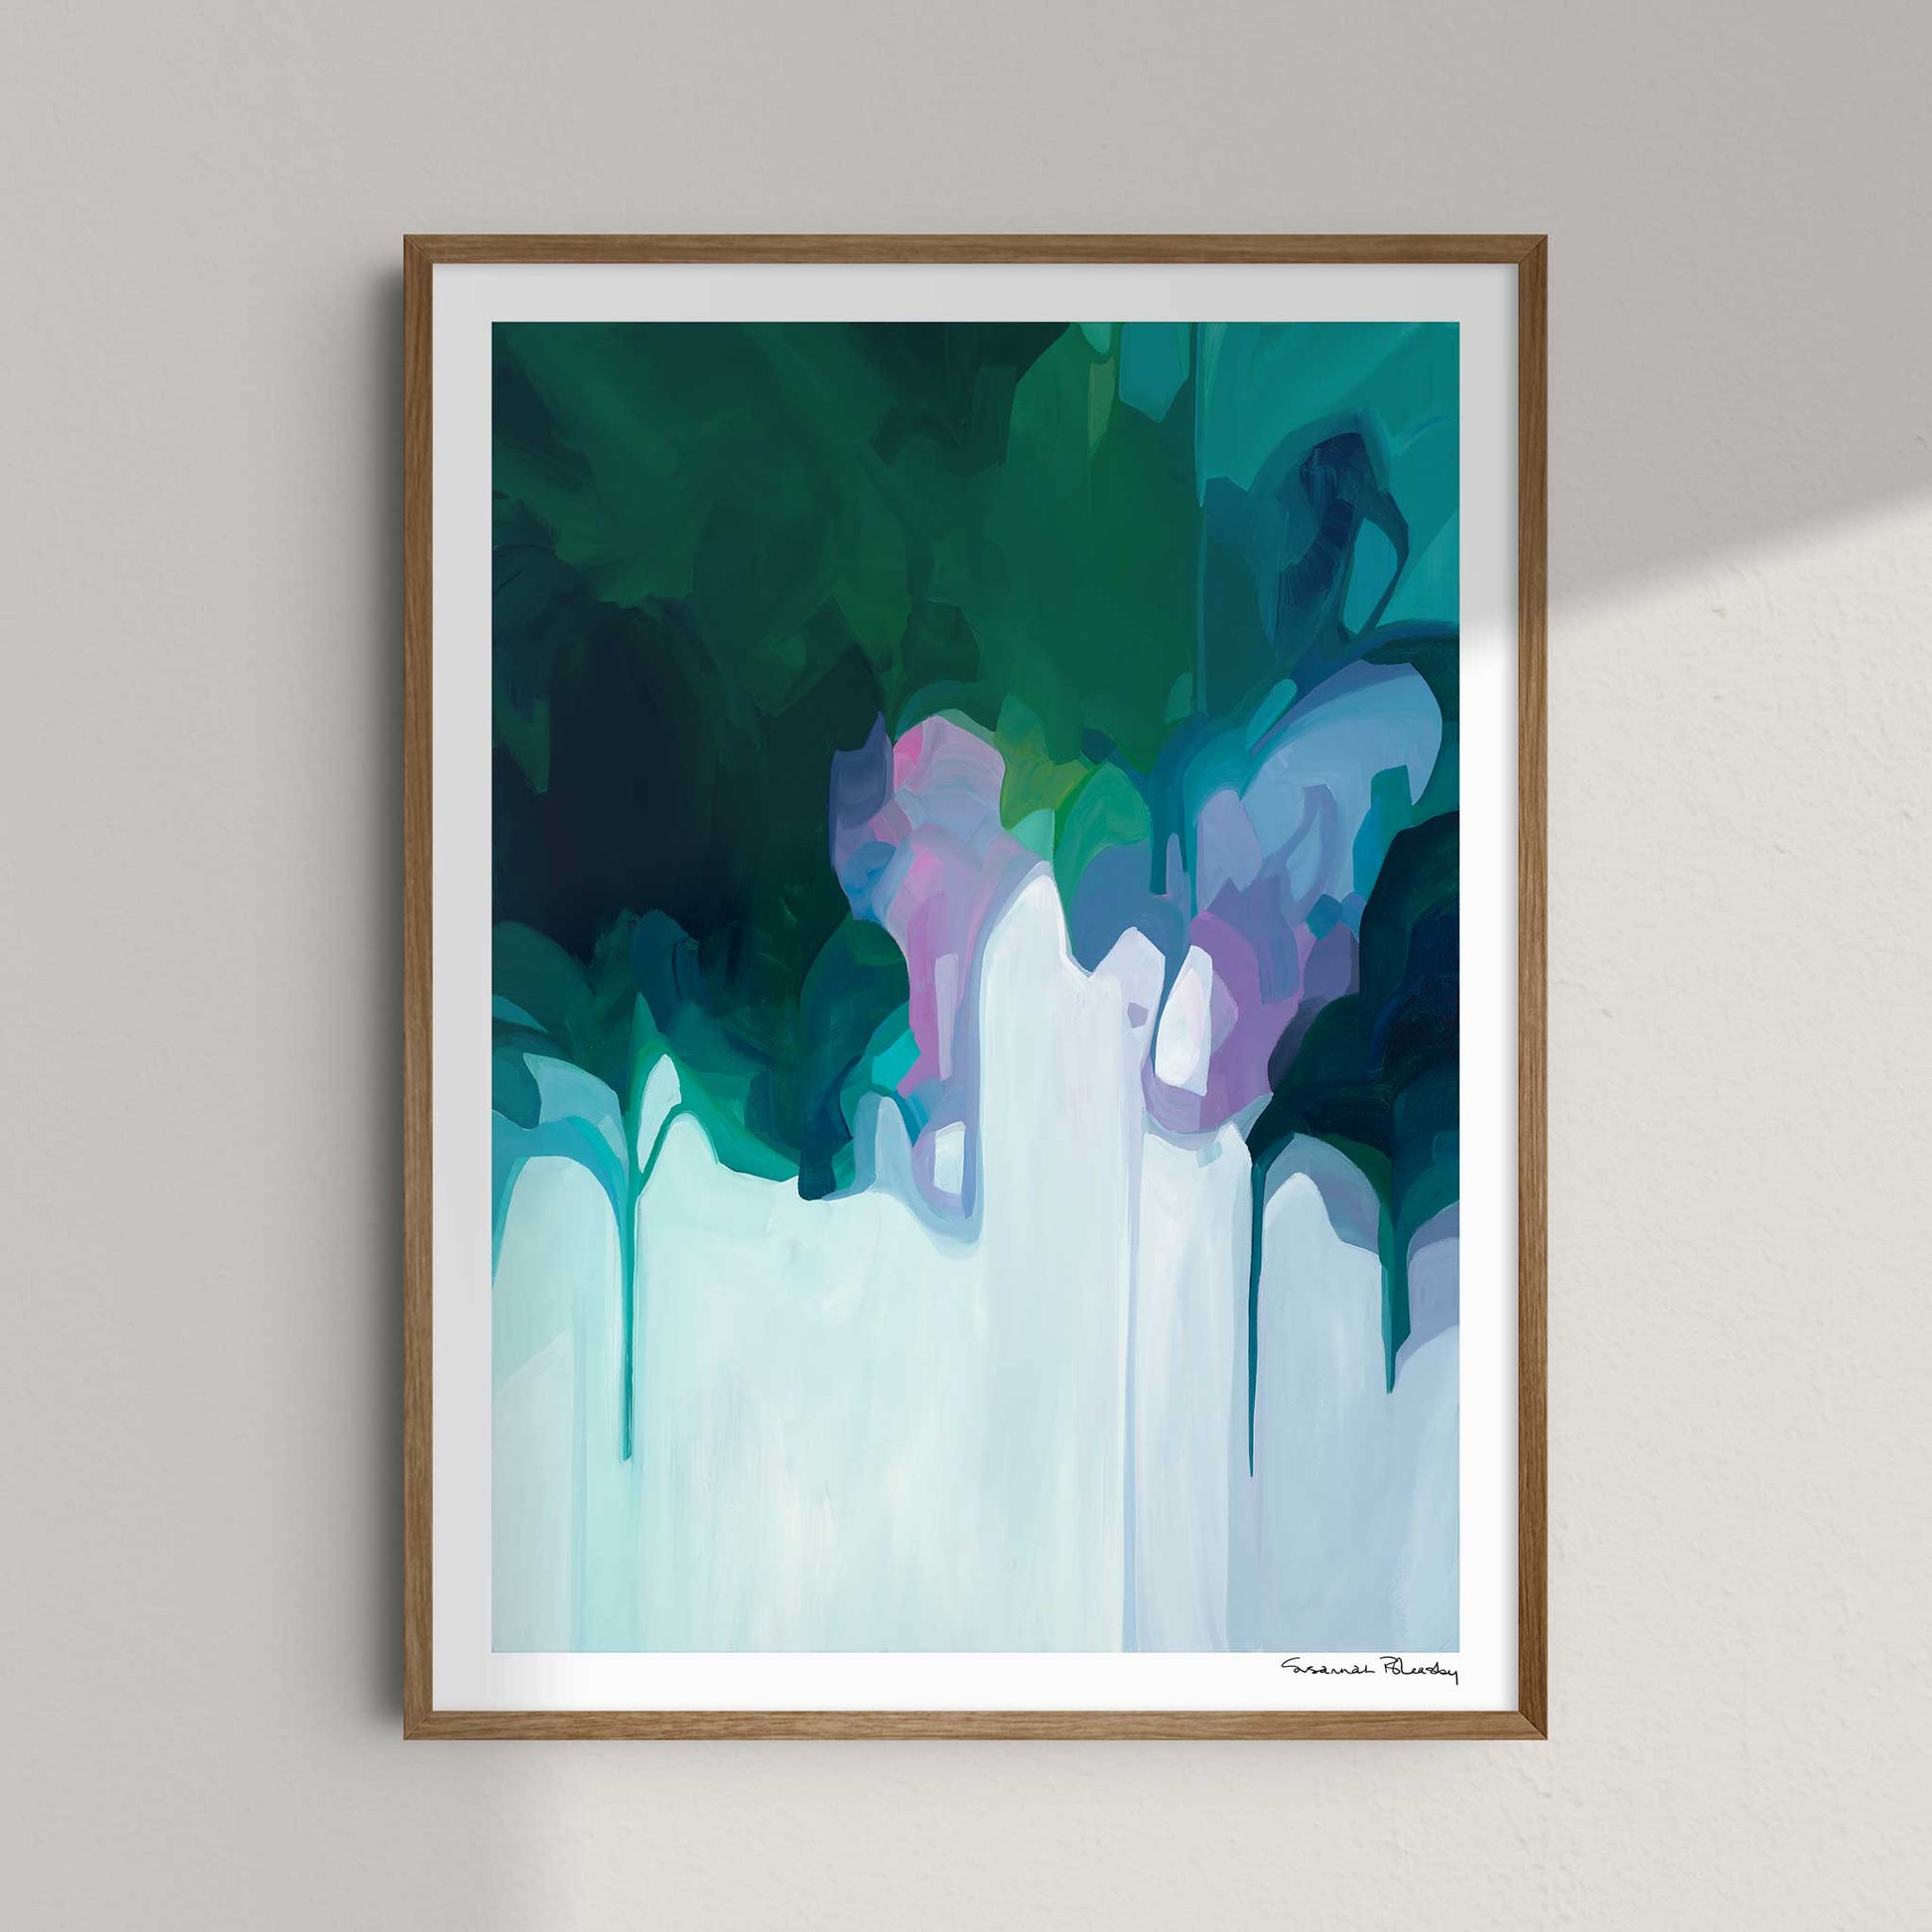 acrylic abstract painting art print of green blue abstract artwork in 3:4 aspect ratio